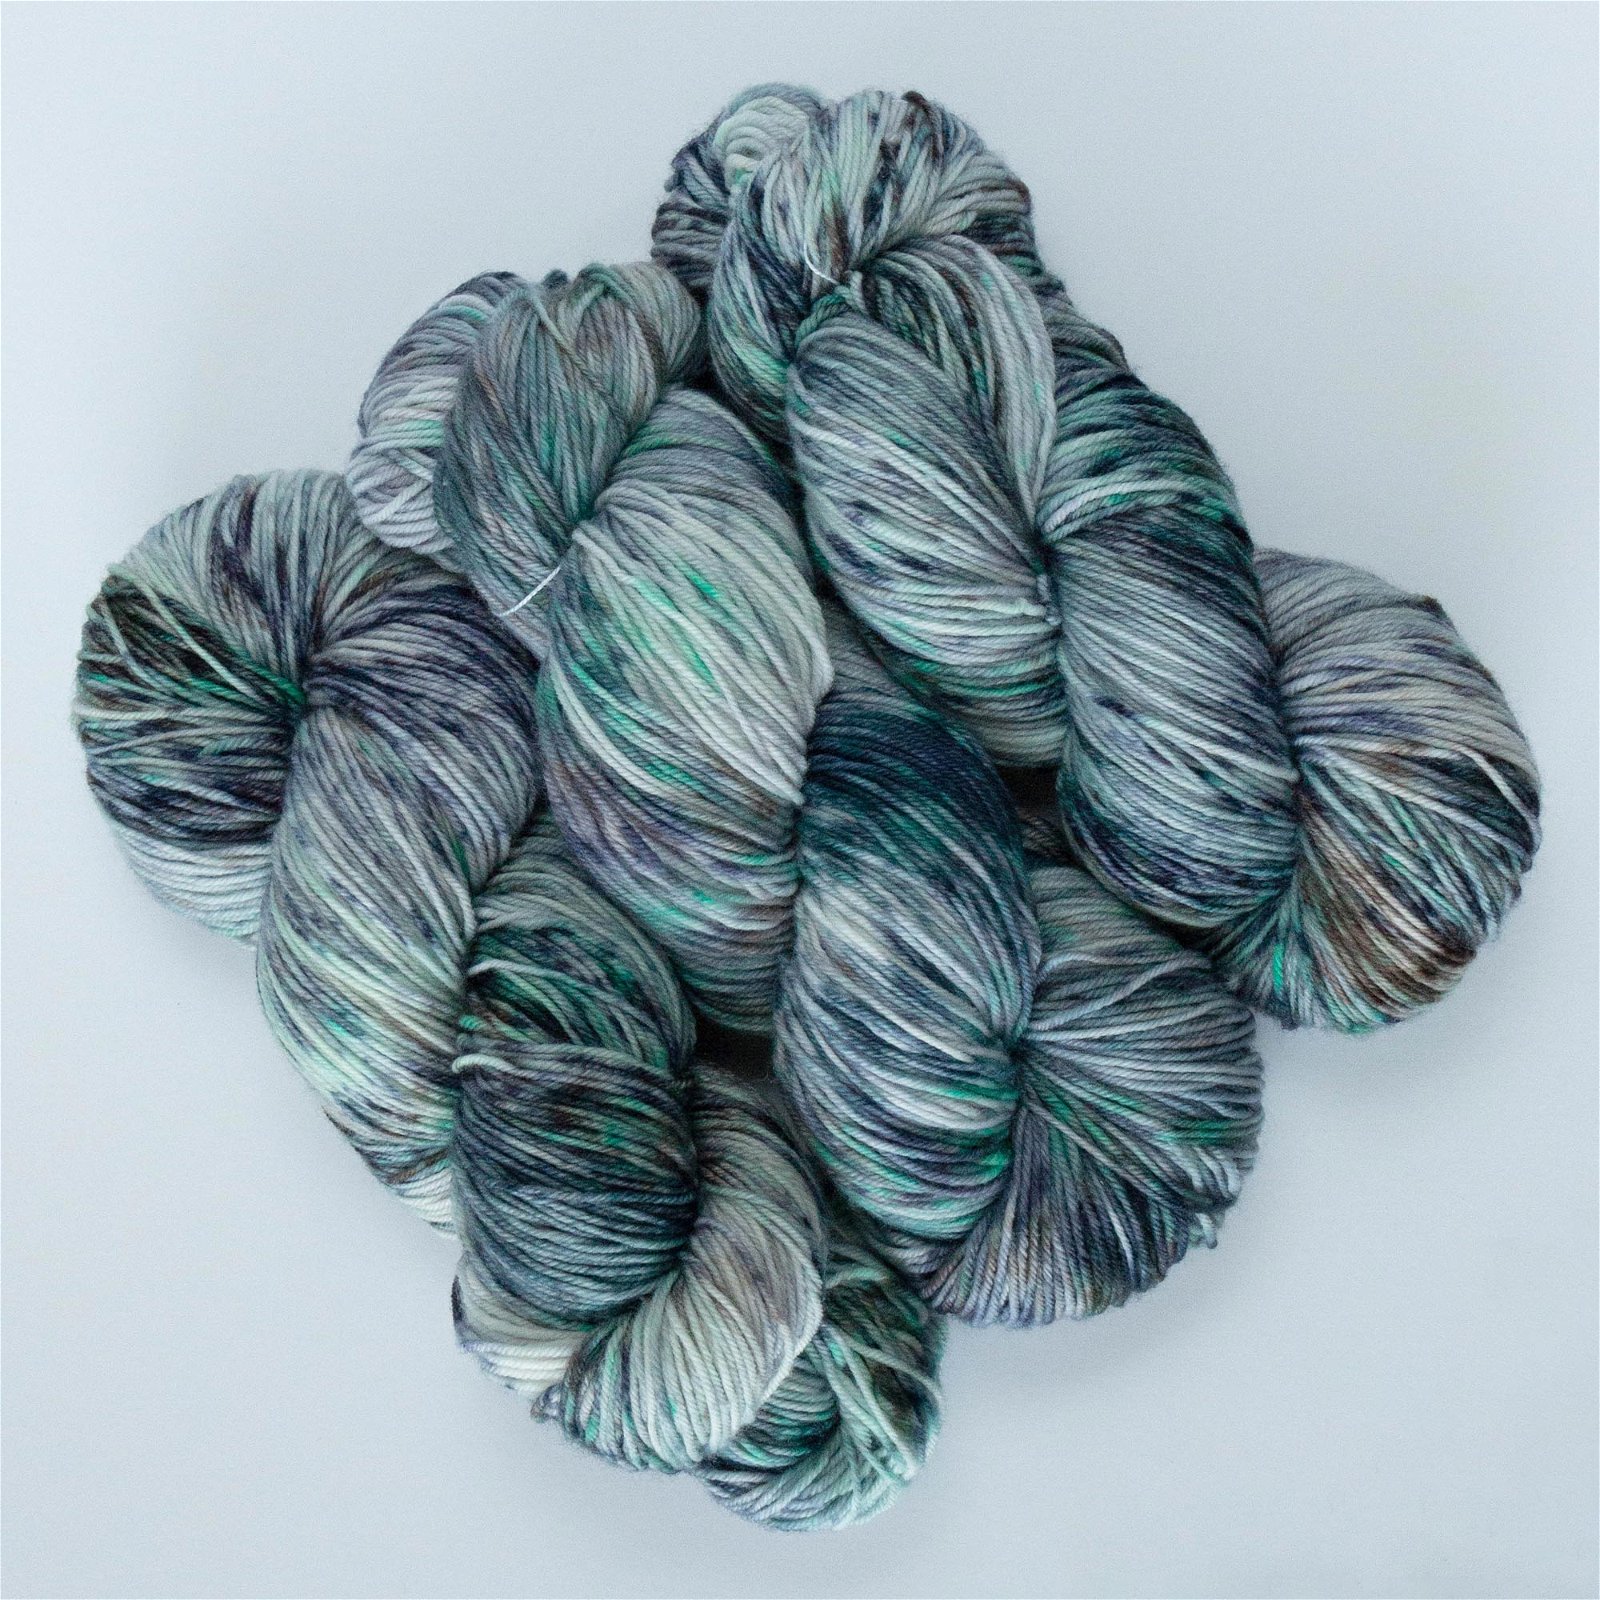 Image of Summer Camp Sock Yarn in Tones of Blue, Green, Brown and White -- Hand Dyed Extrafine Merino Wool Blend